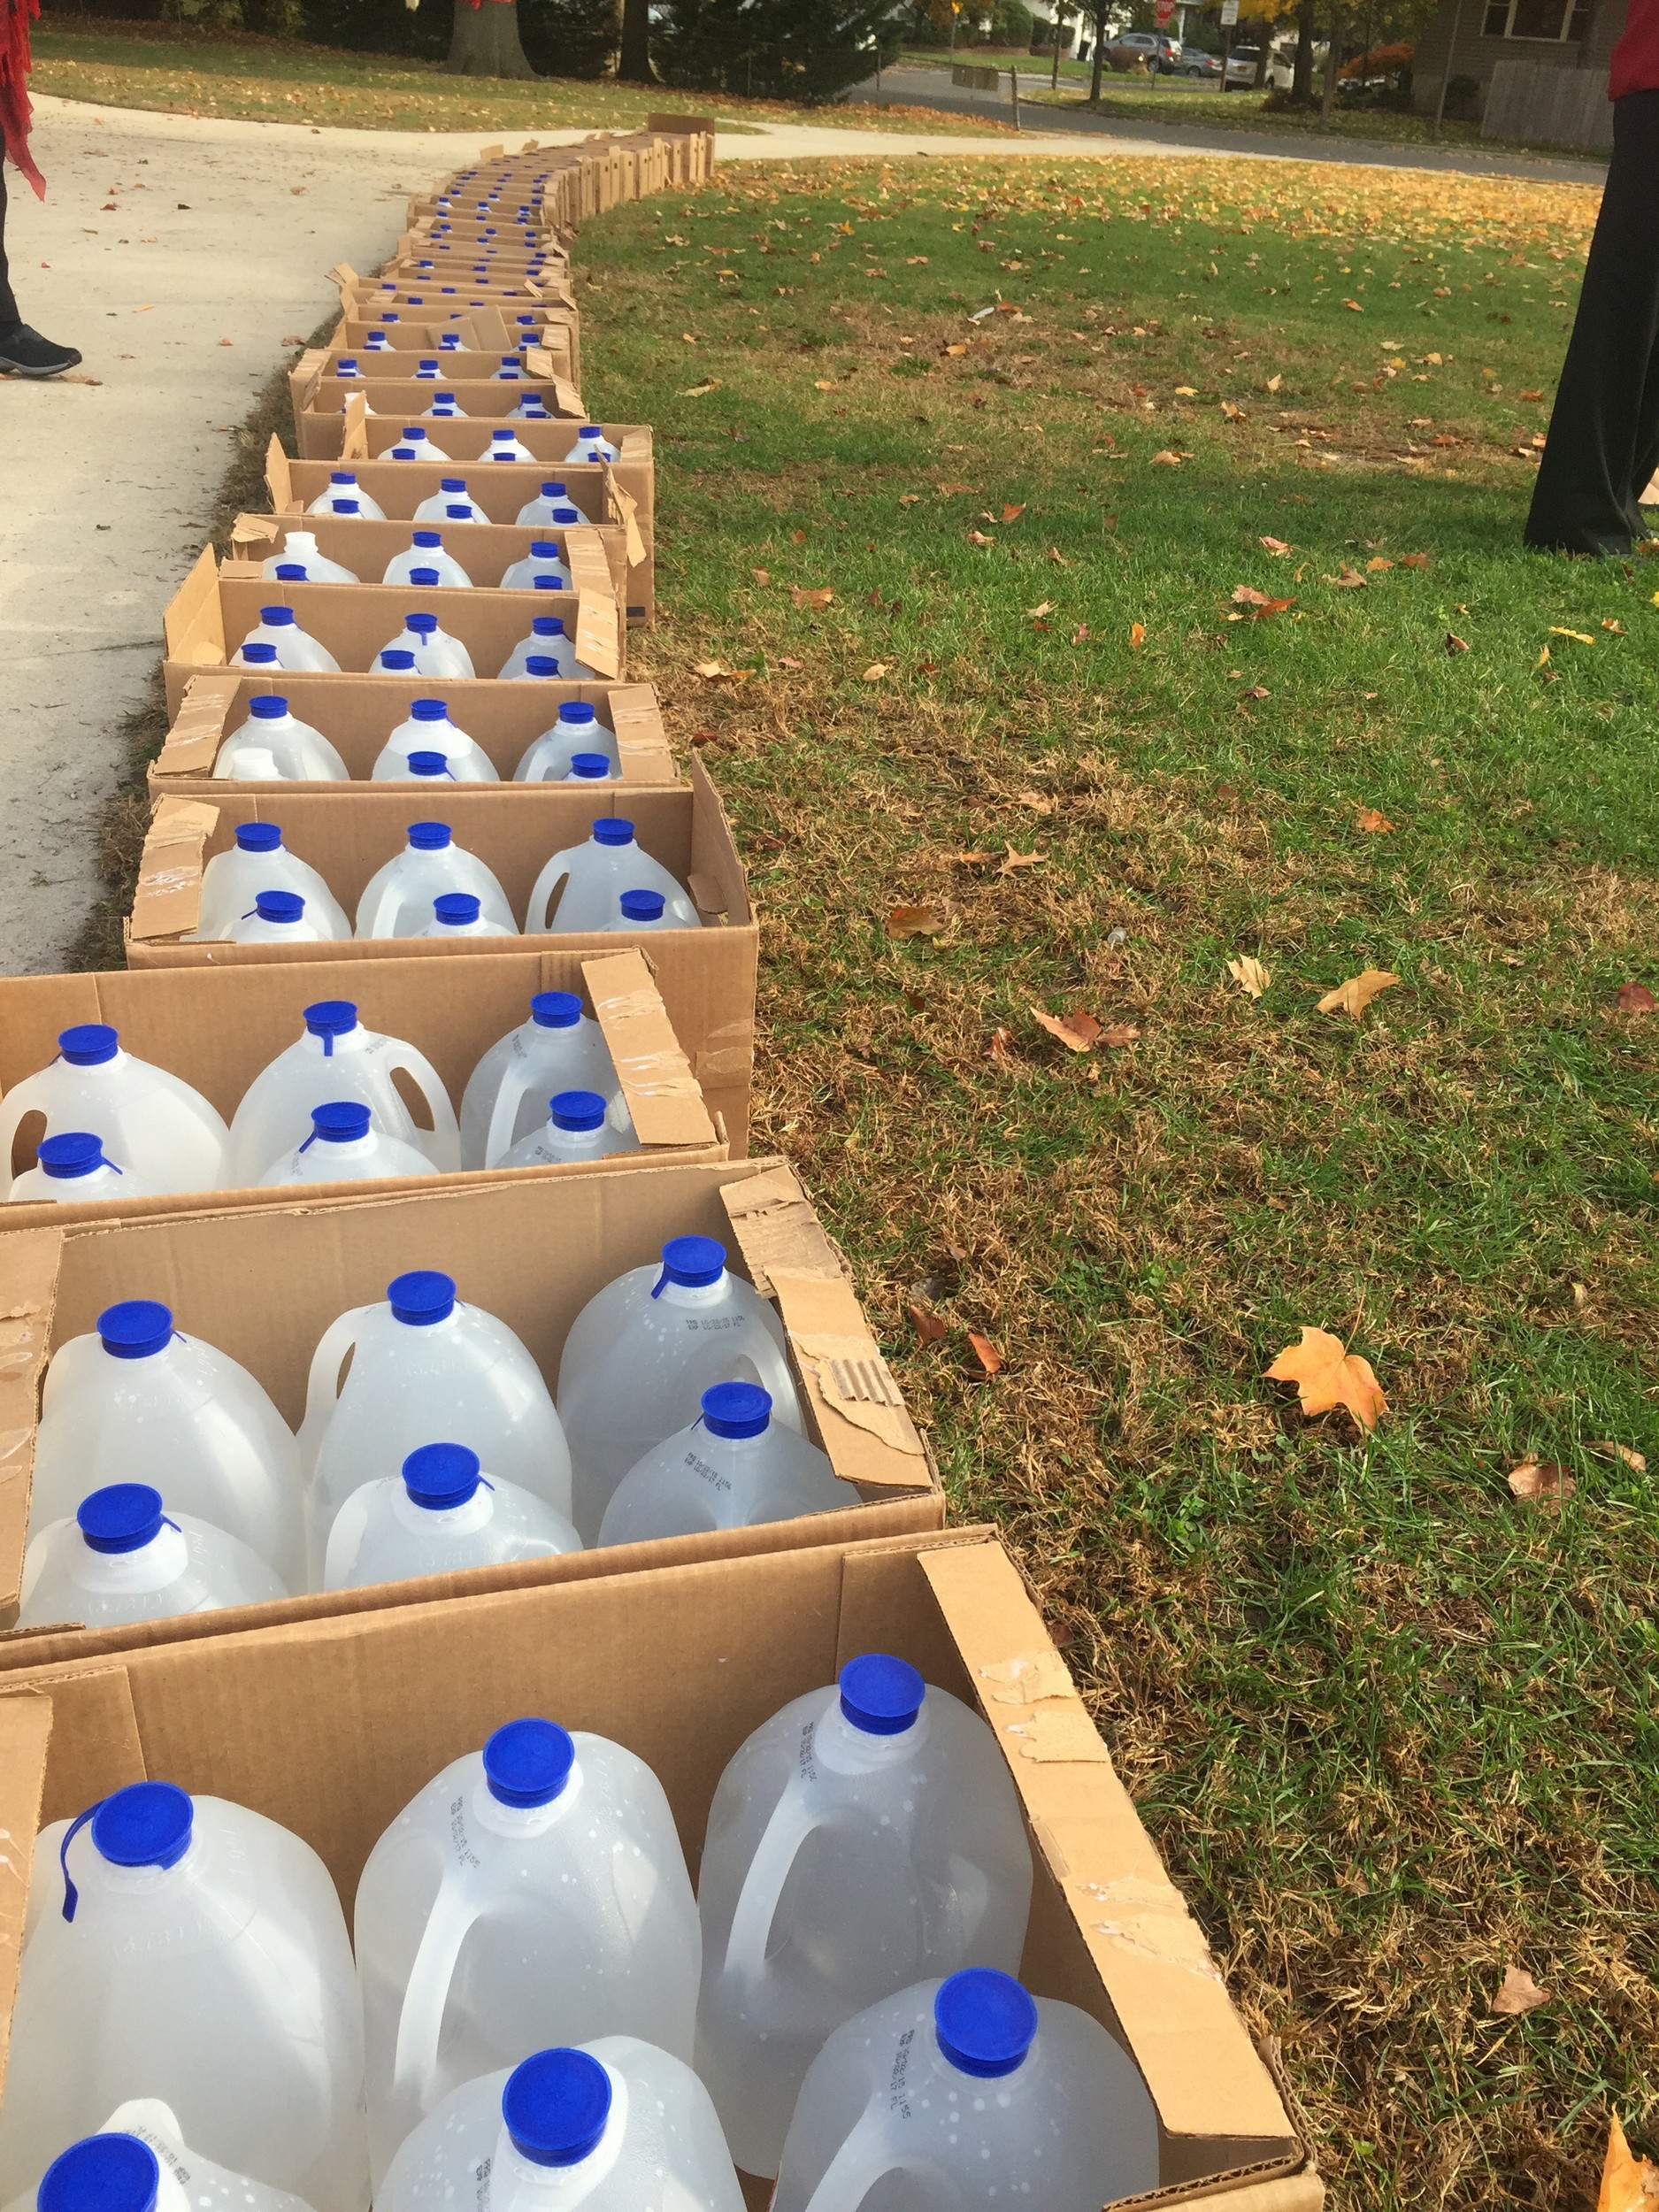 In addition to raising funds for Water for South Sudan, students donated 2,800 pounds of water to Island Harvest Food Bank